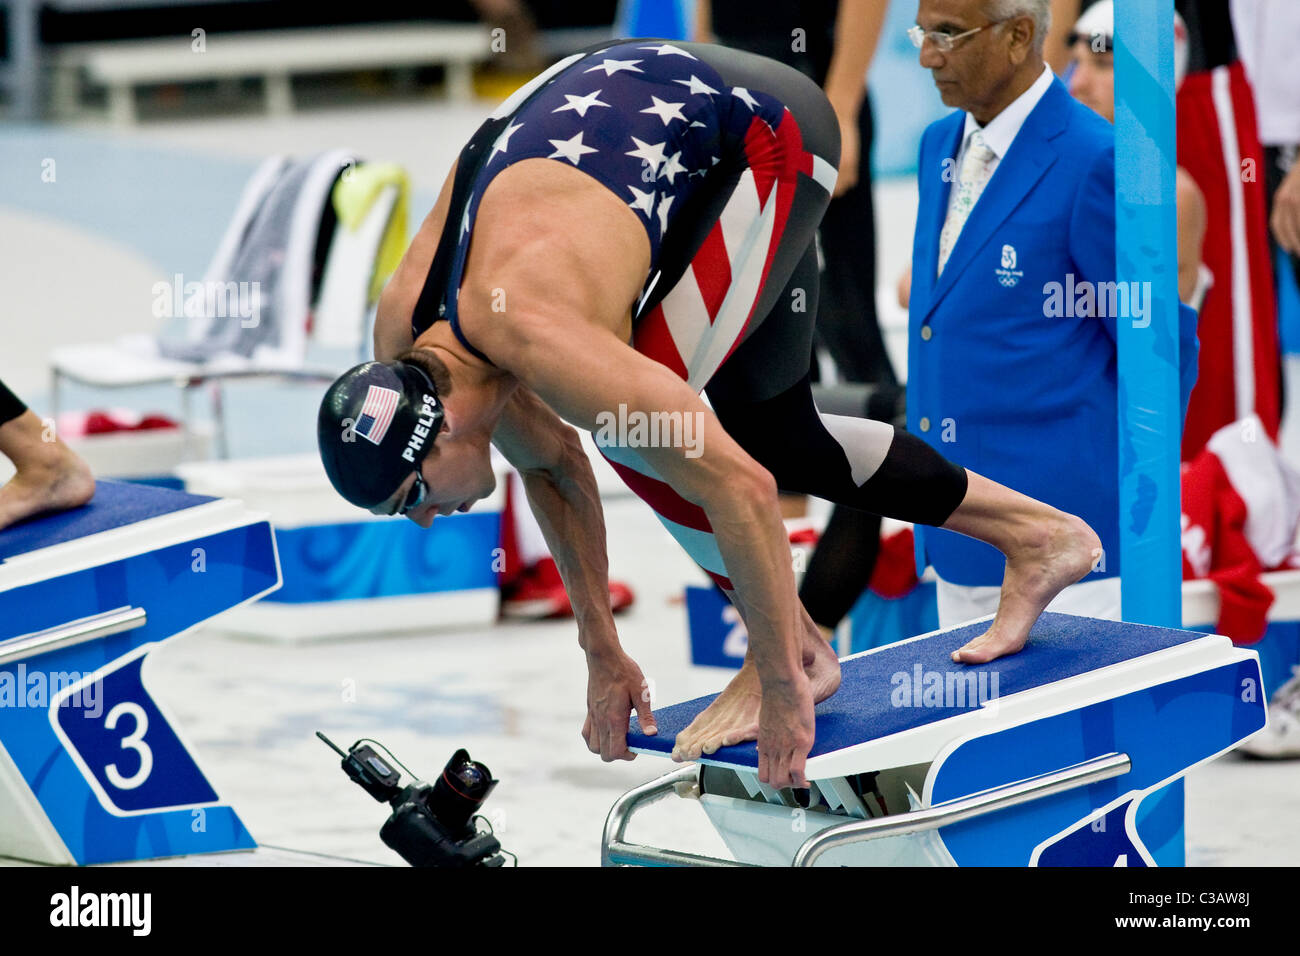 Michael Phelps starting the 4X200 relay in the swimming competition at the 2008 Olympic Summer Games, Beijing, China Stock Photo